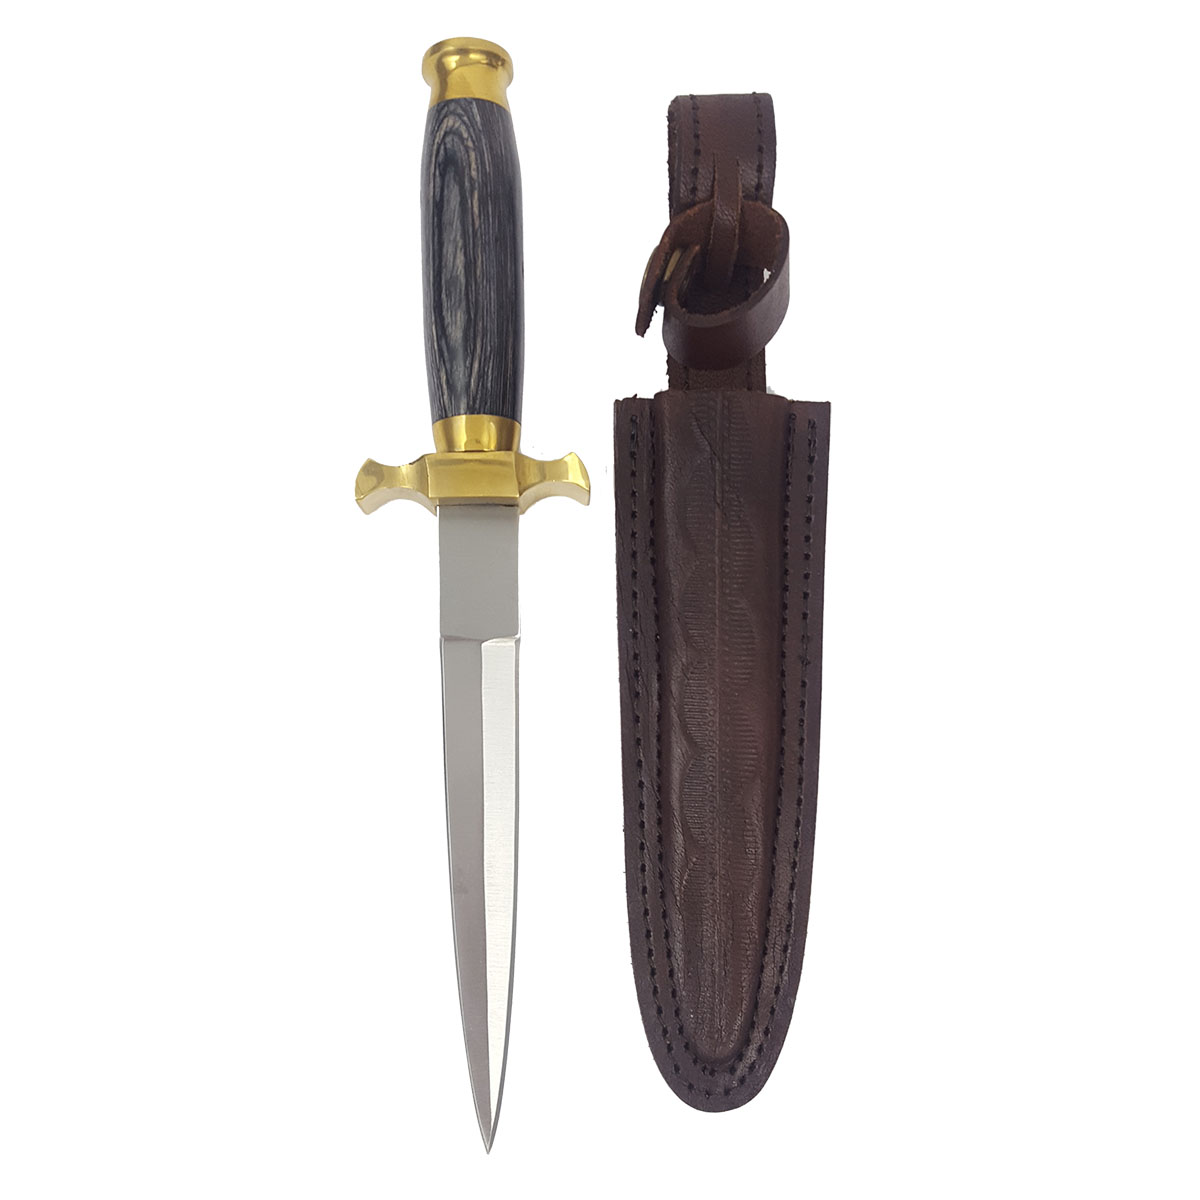 A 12 inch Renaissance Dagger with a leather sheath on a white background.